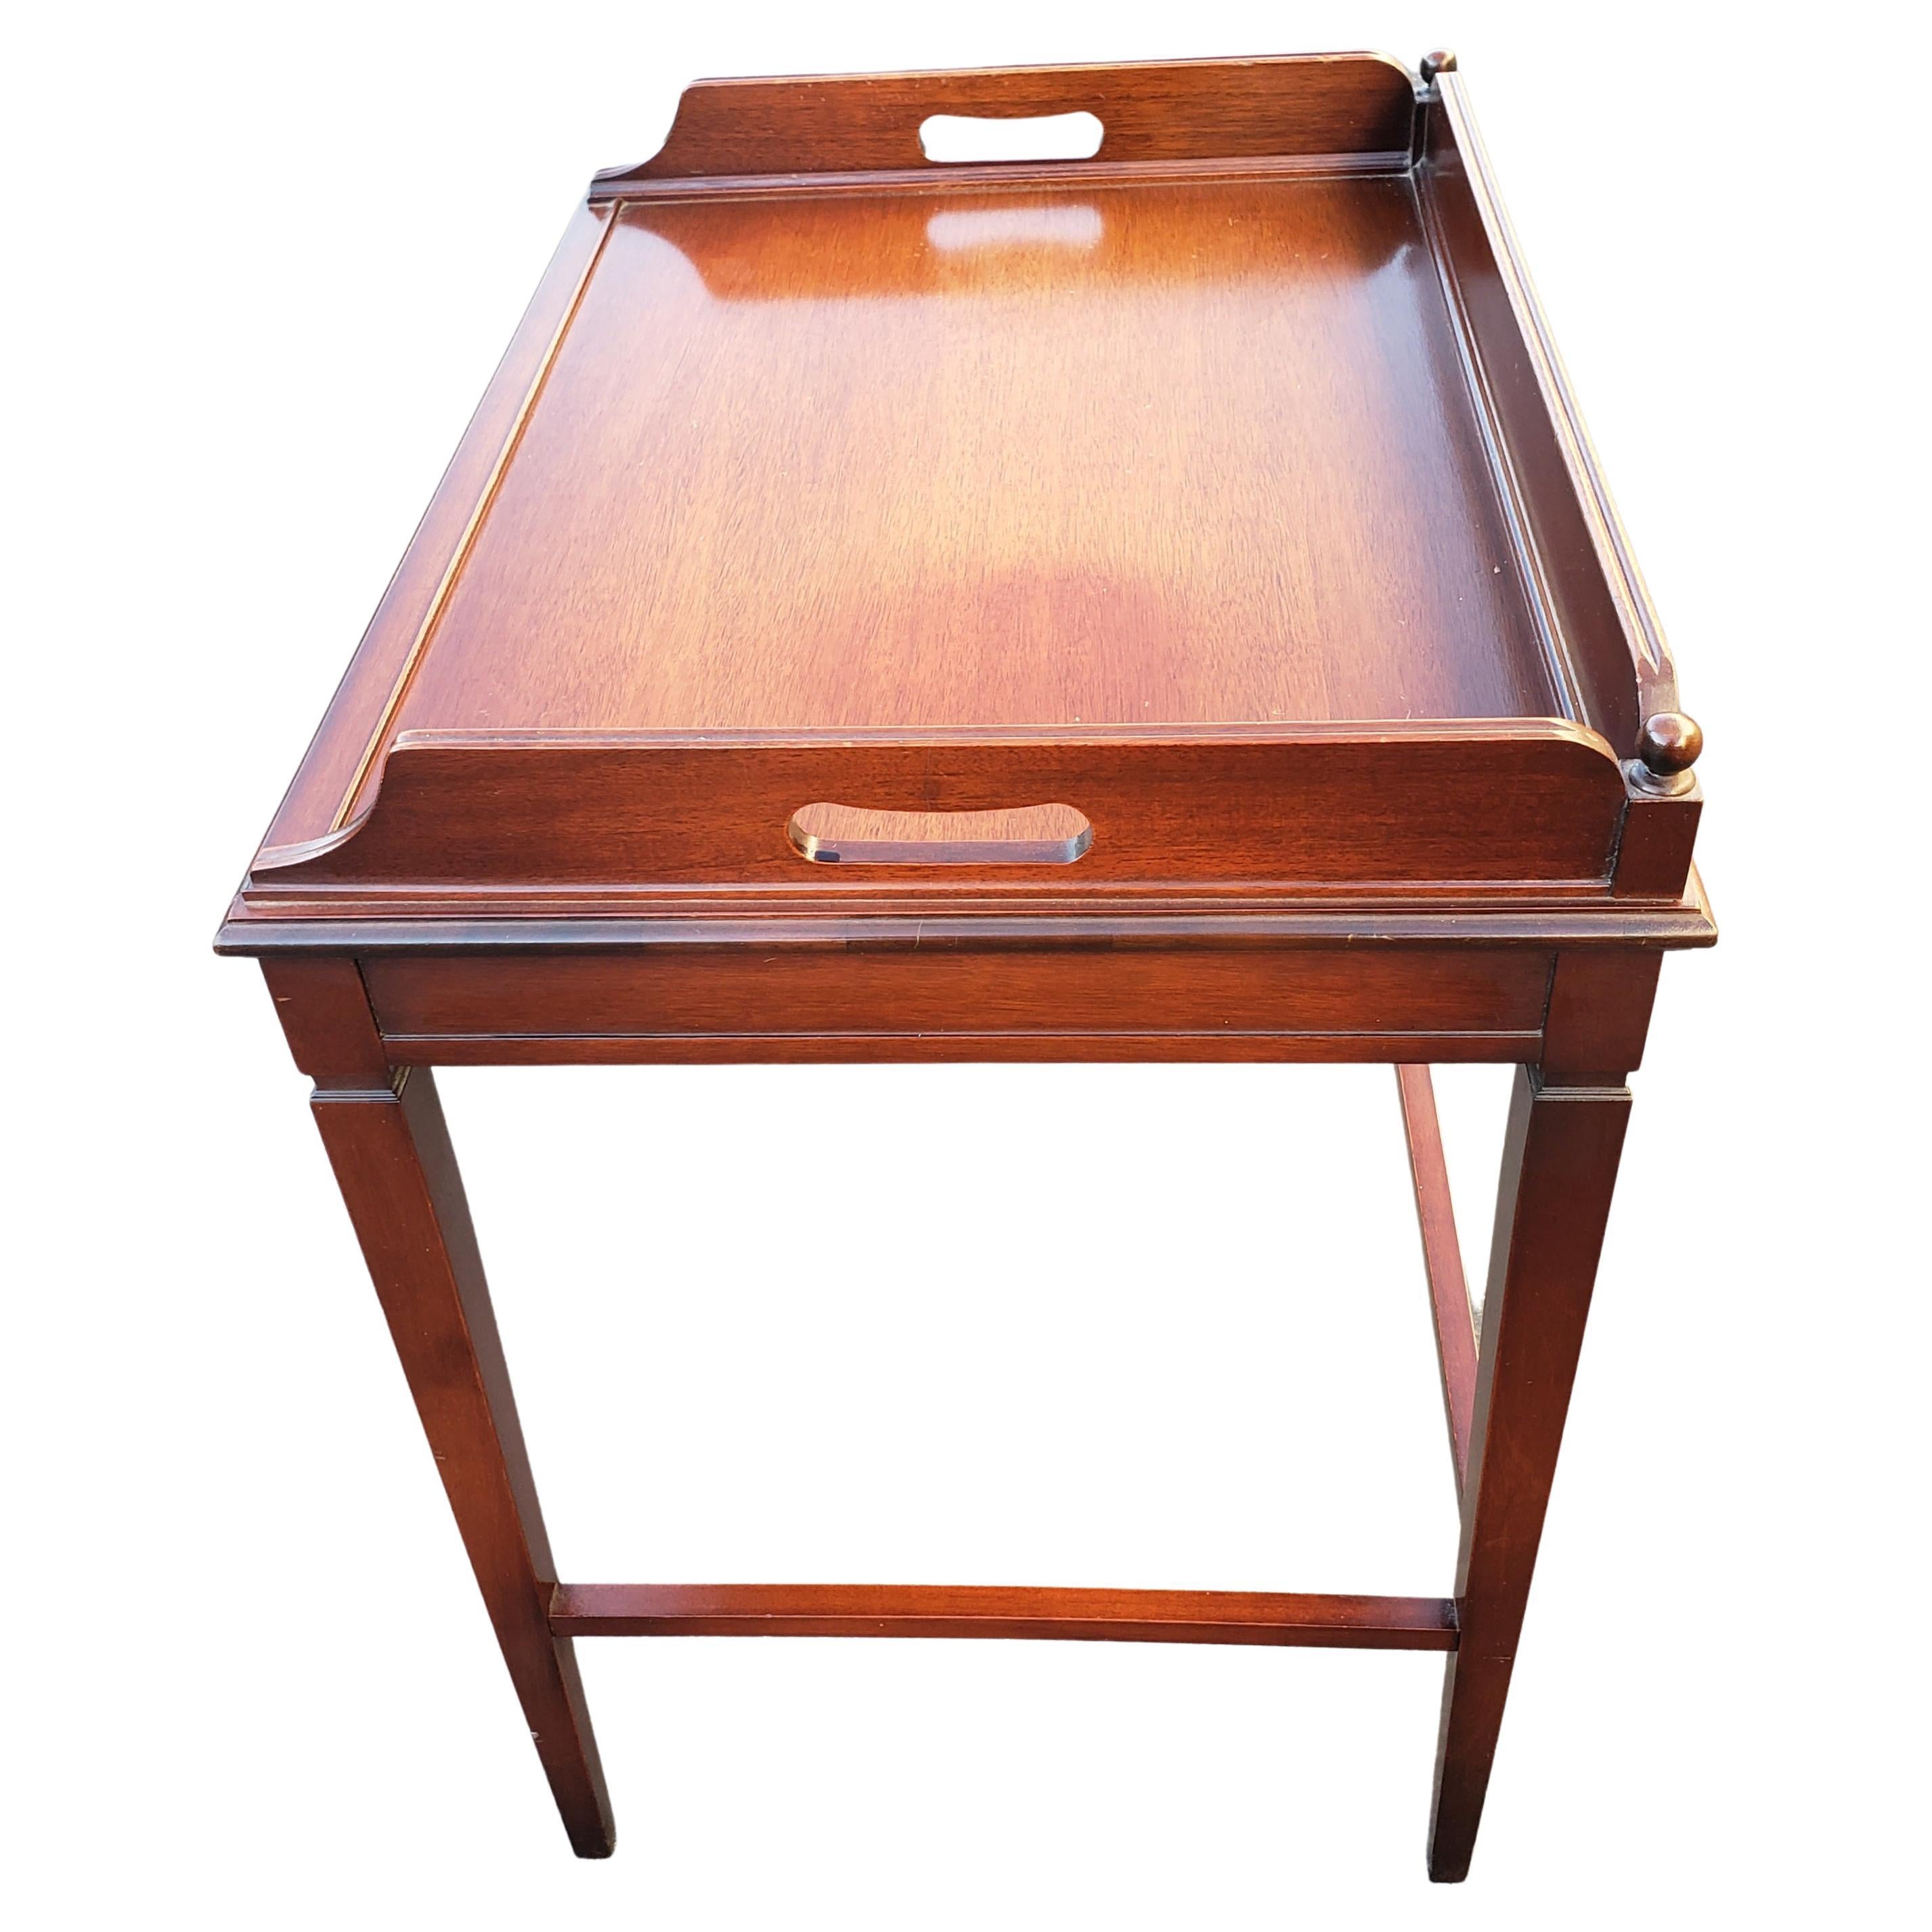 Imperial grand rapids mahogany butlers tray table, Circa 1960s.
Good vintage condition.
Measures 24